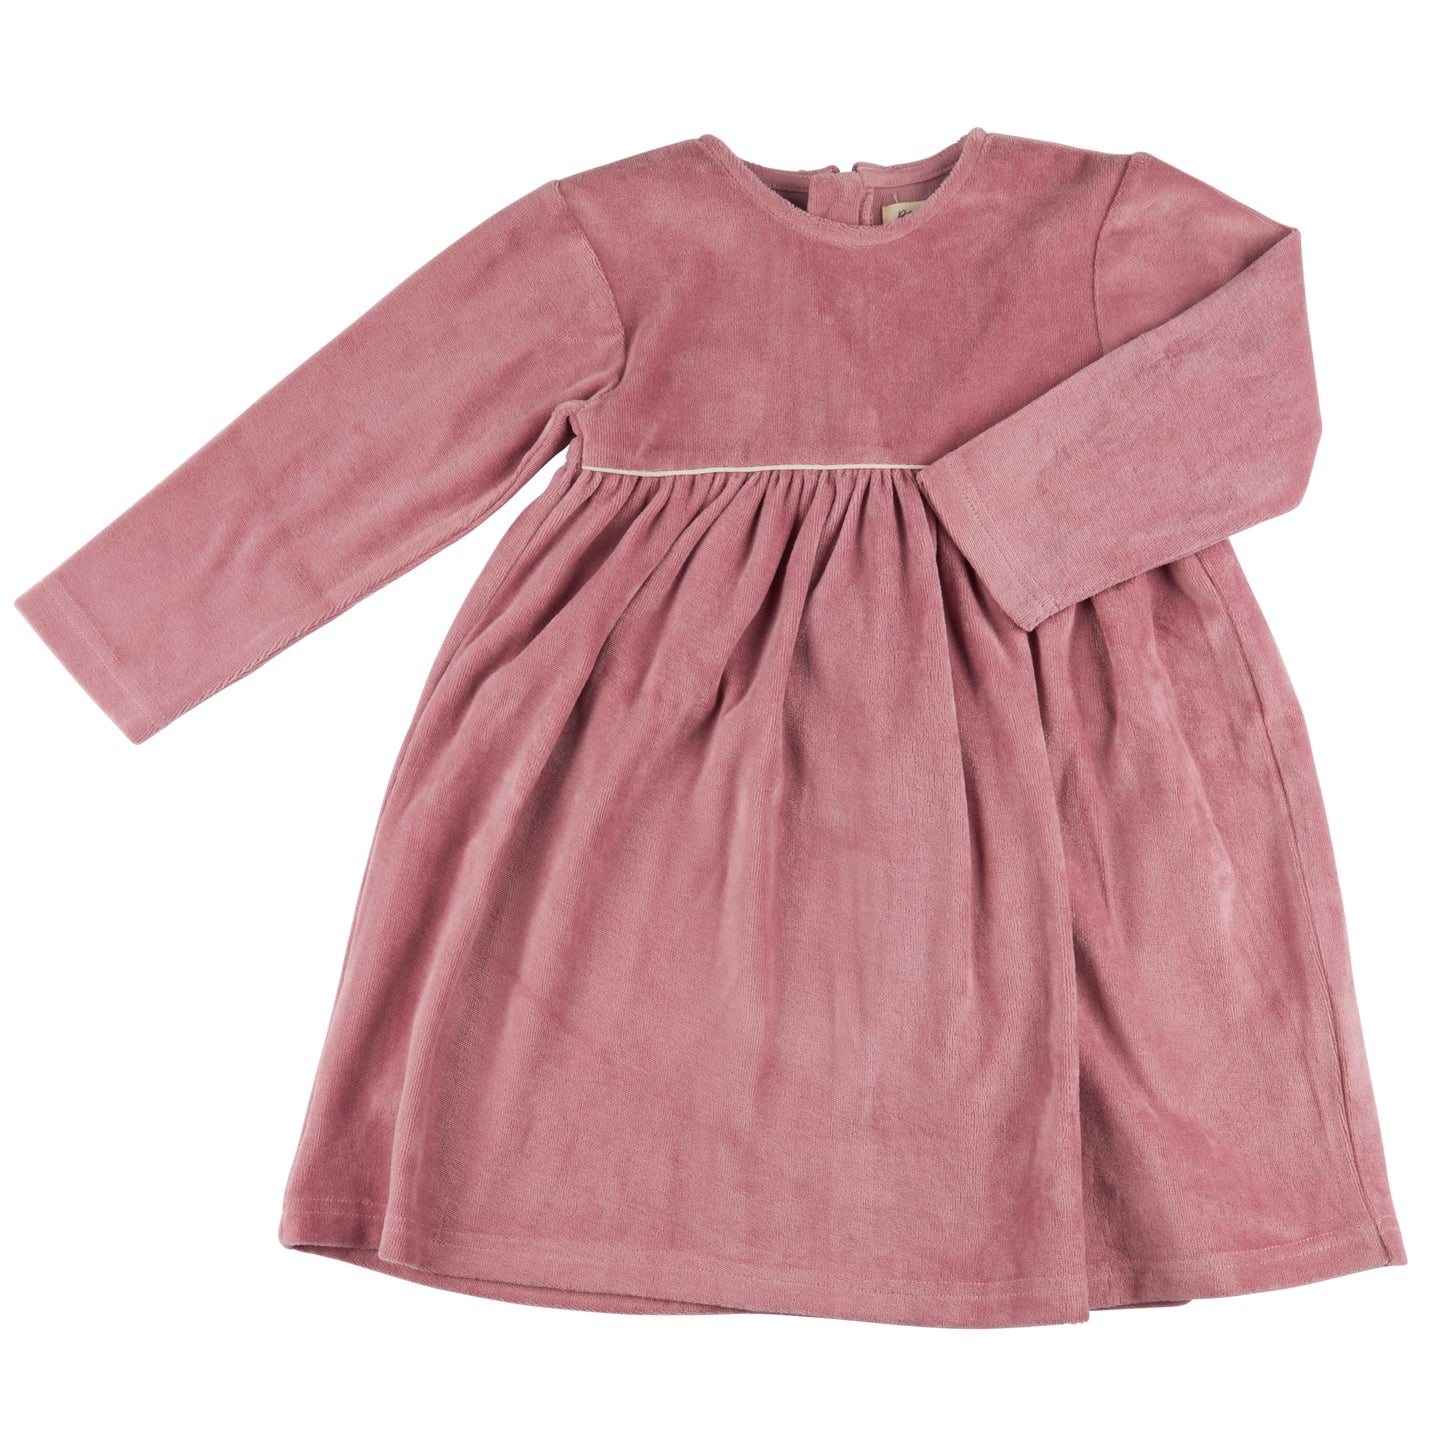 pigeon organics velour party dress in pink at whippersnappersonline